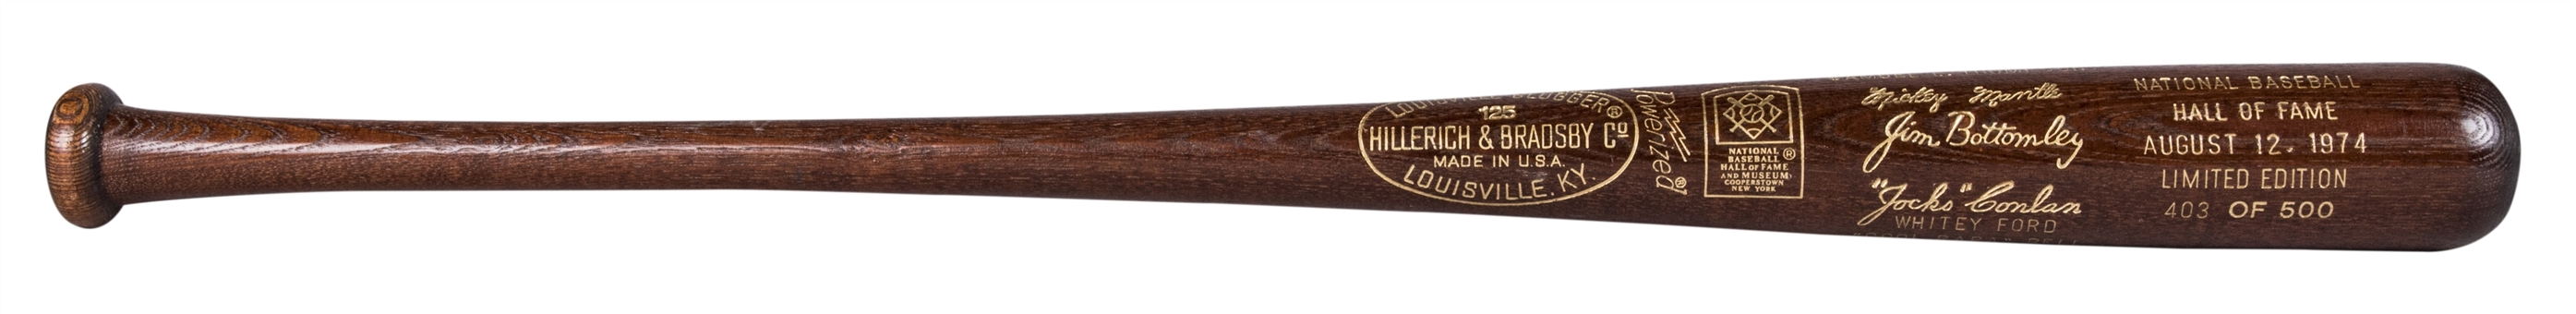 1974 Louisville Slugger "Hall of Fame Induction" Commemorative Bat (LE 403/500) – Featuring Mickey Mantle